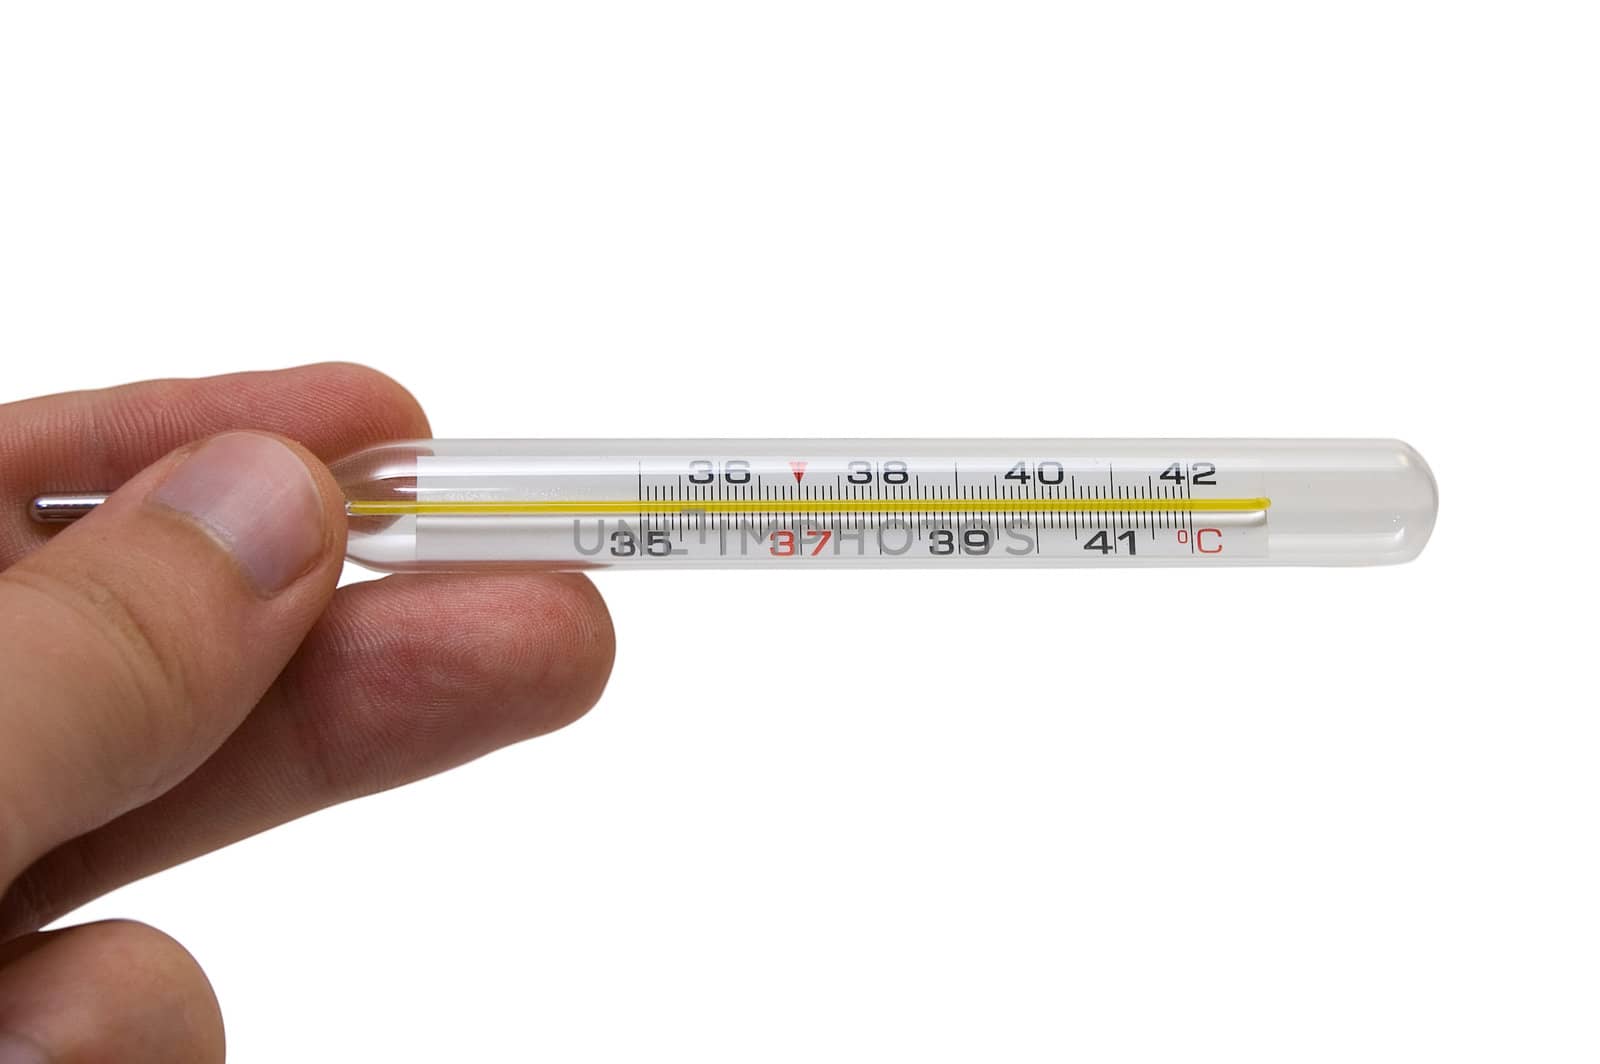 HAND WITH THERMOMETER by rusak